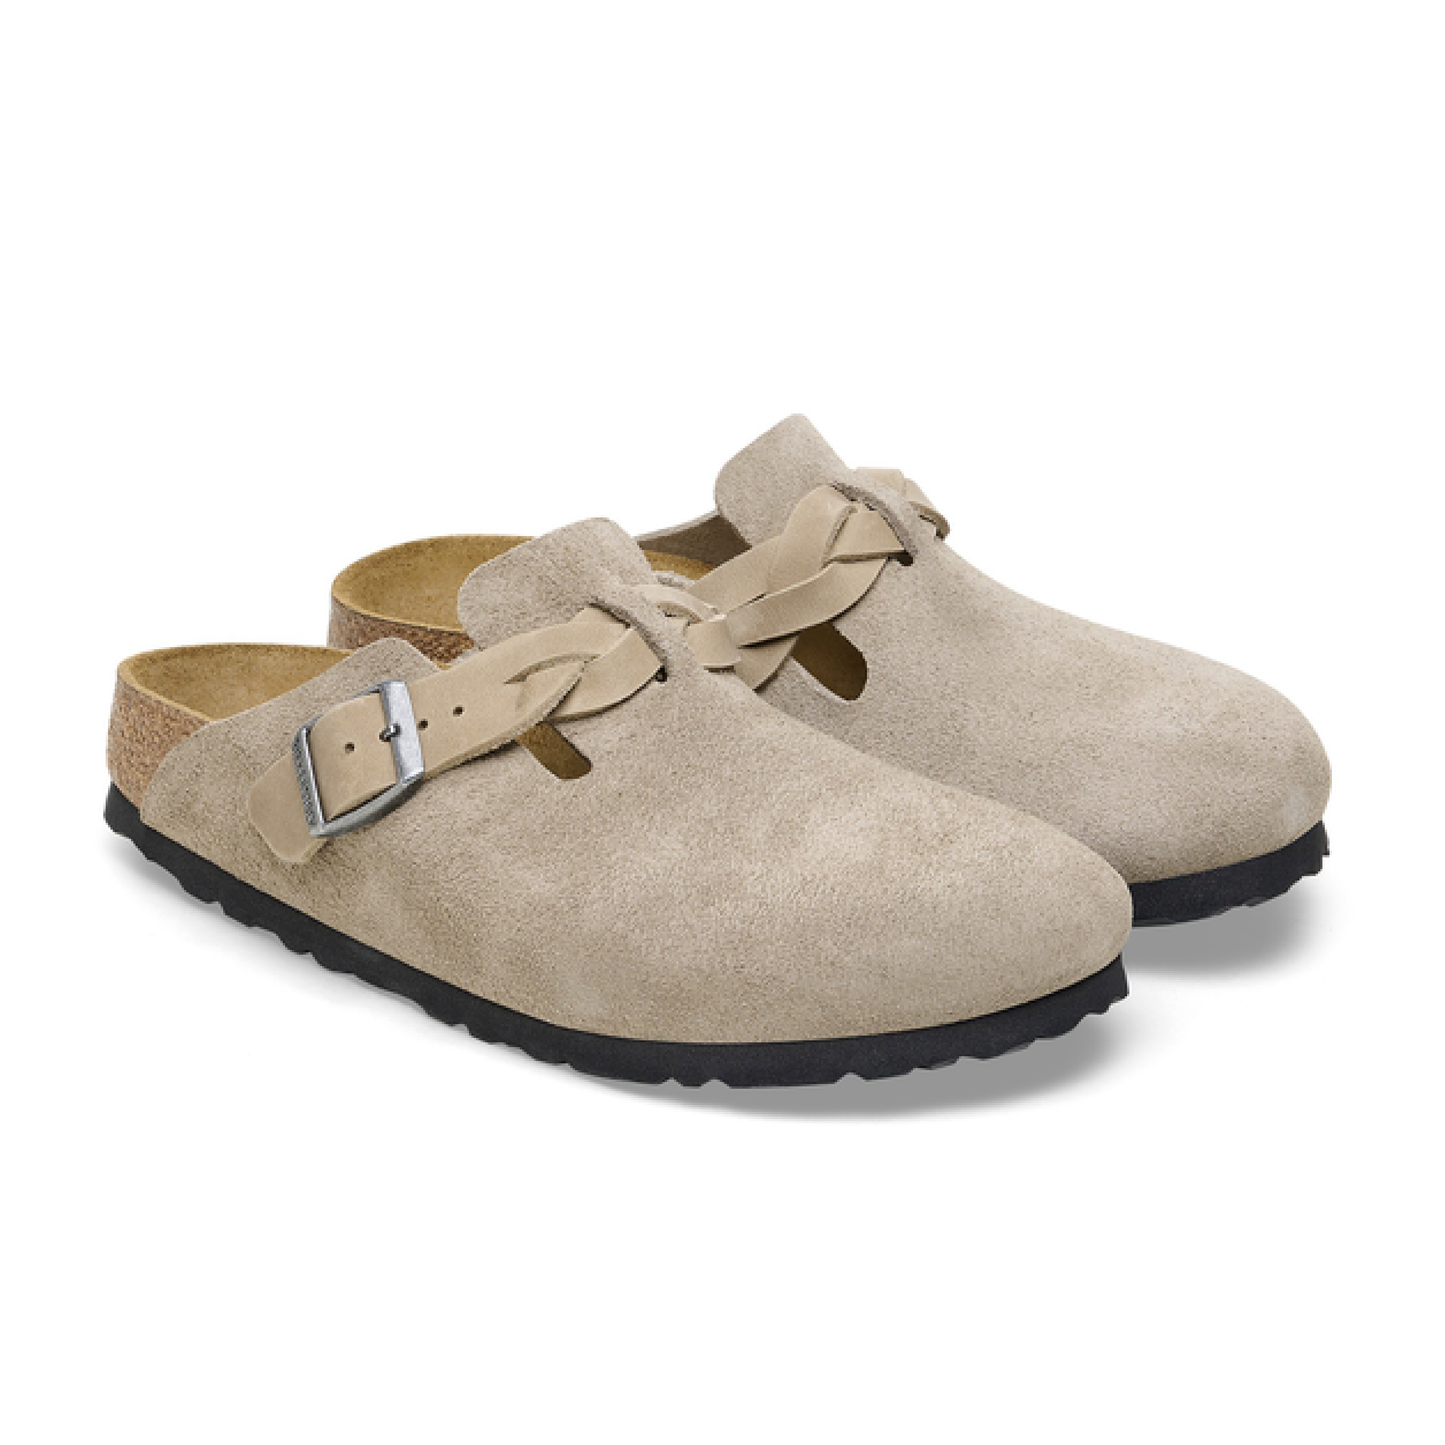 Boston Braided Suede Slippers, Taupe